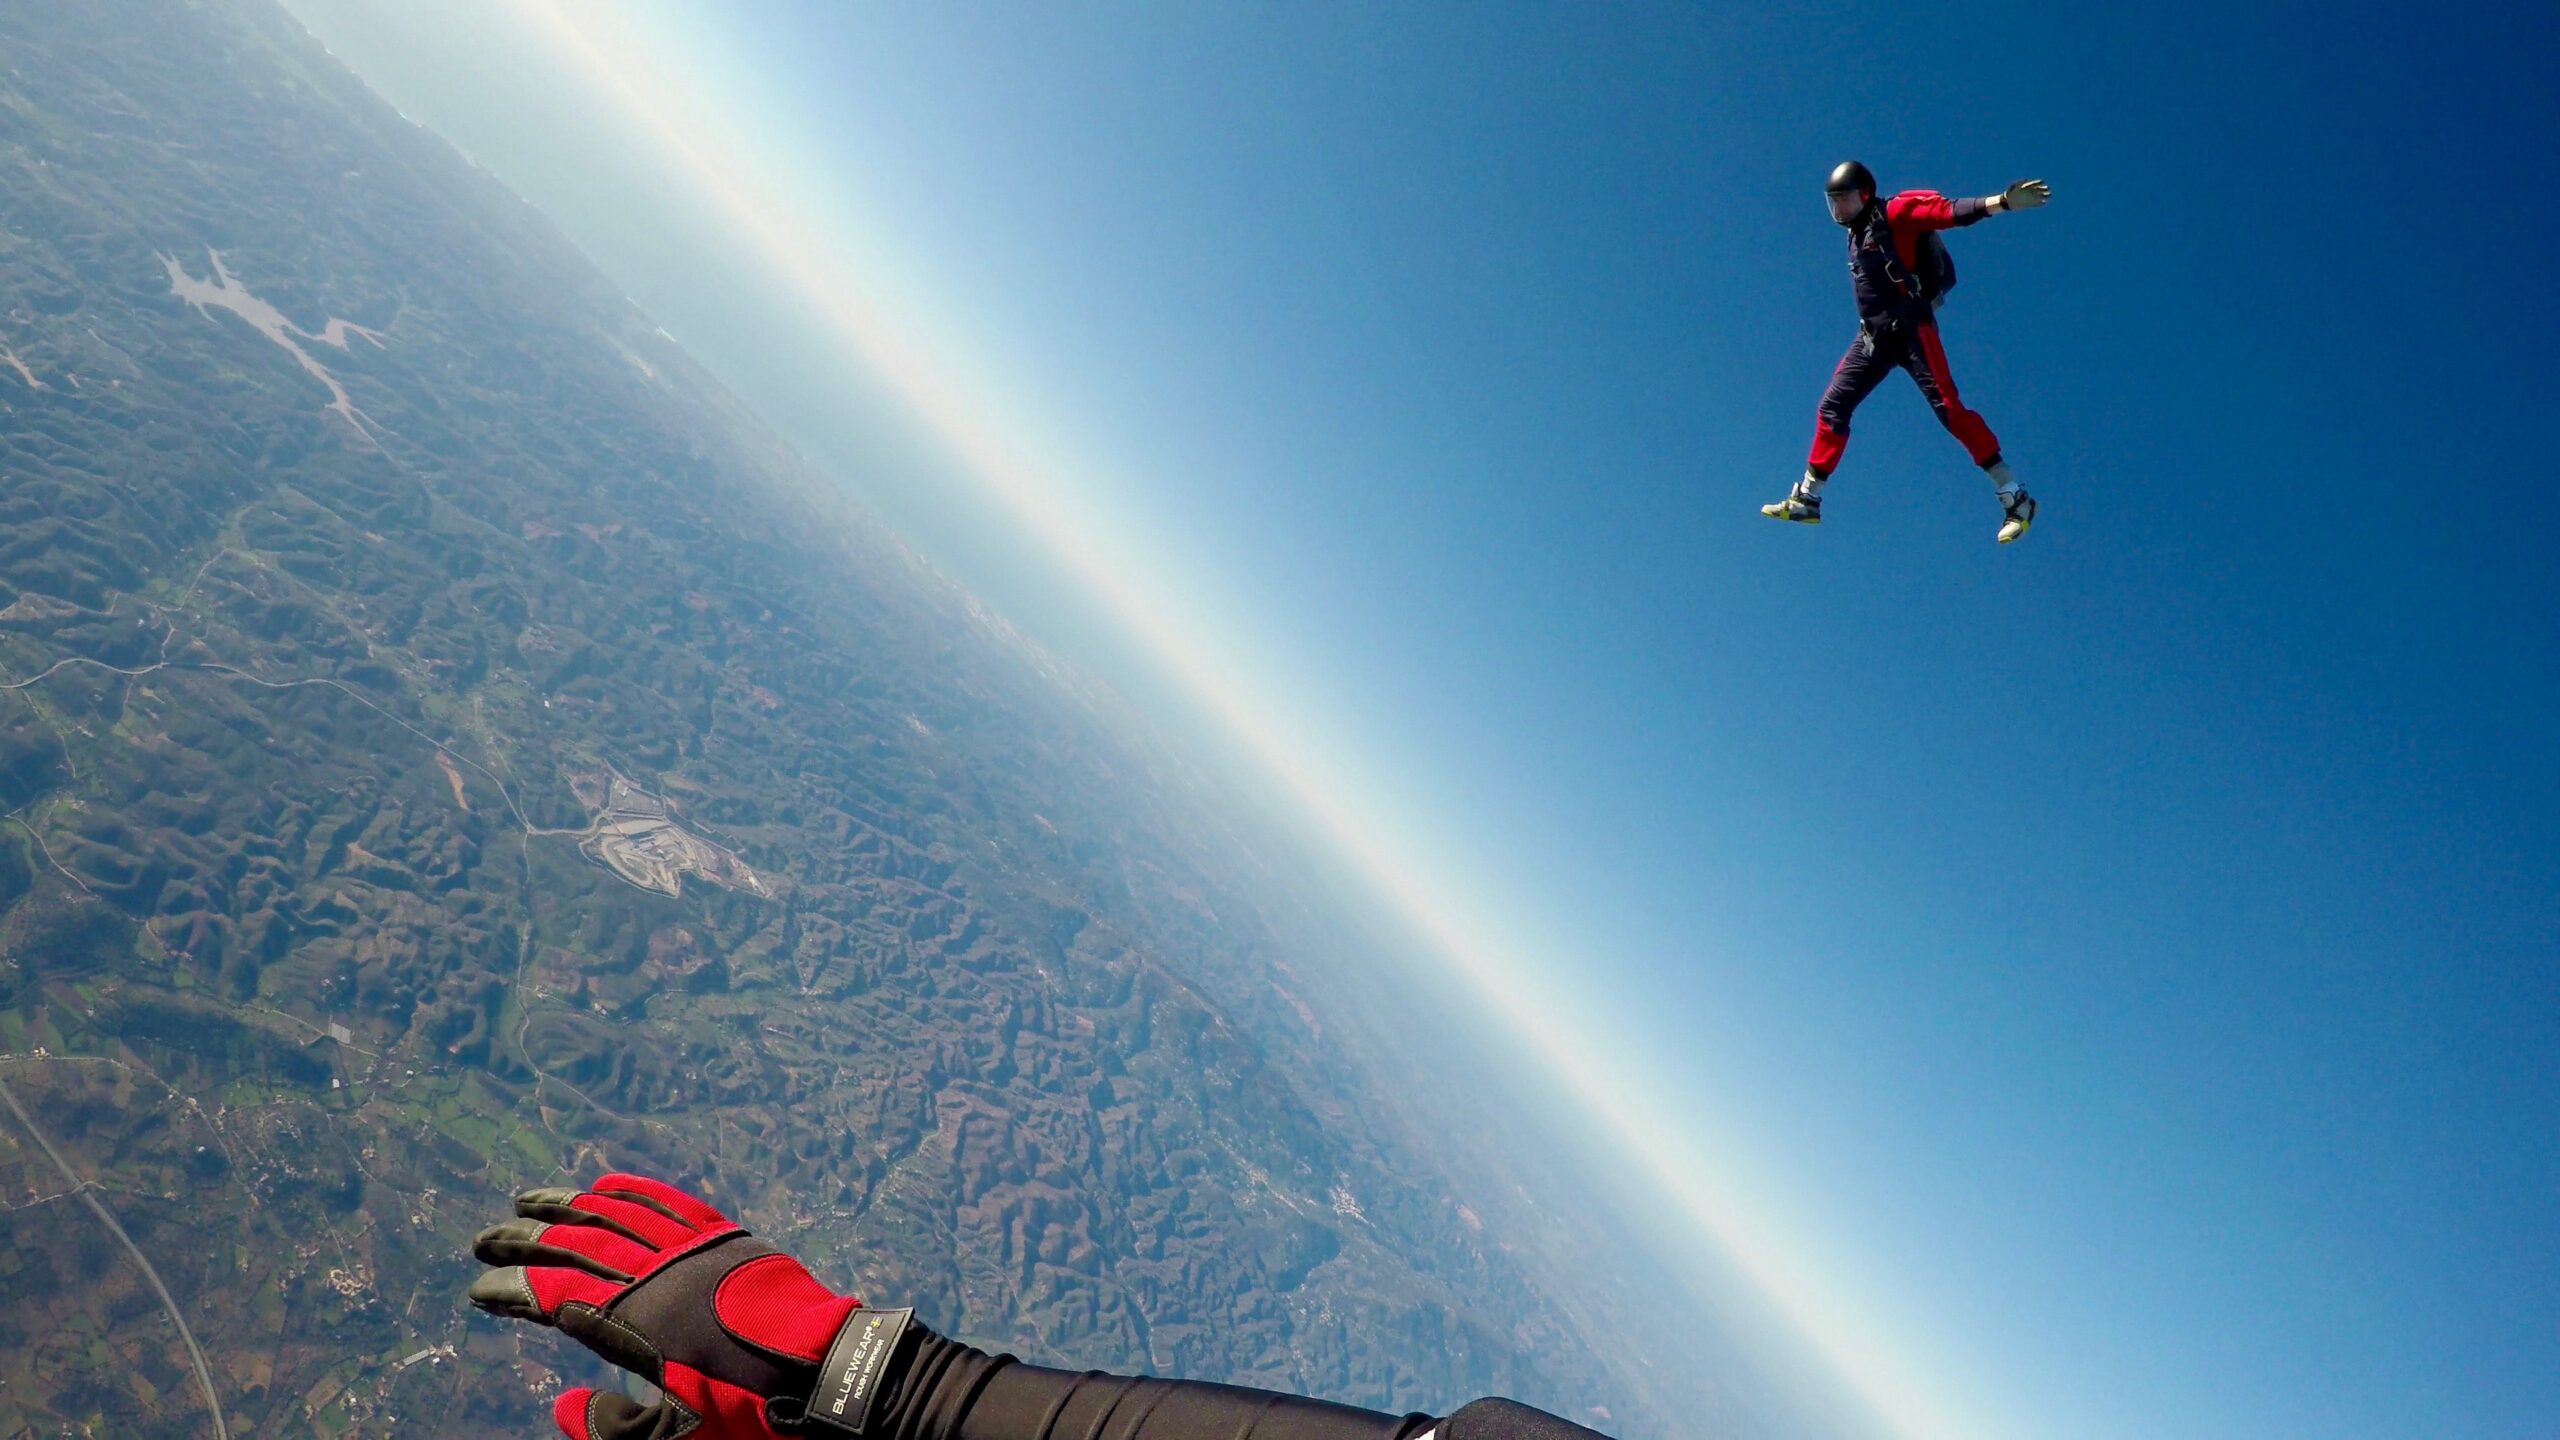 The 9 Best Spots for Skydiving